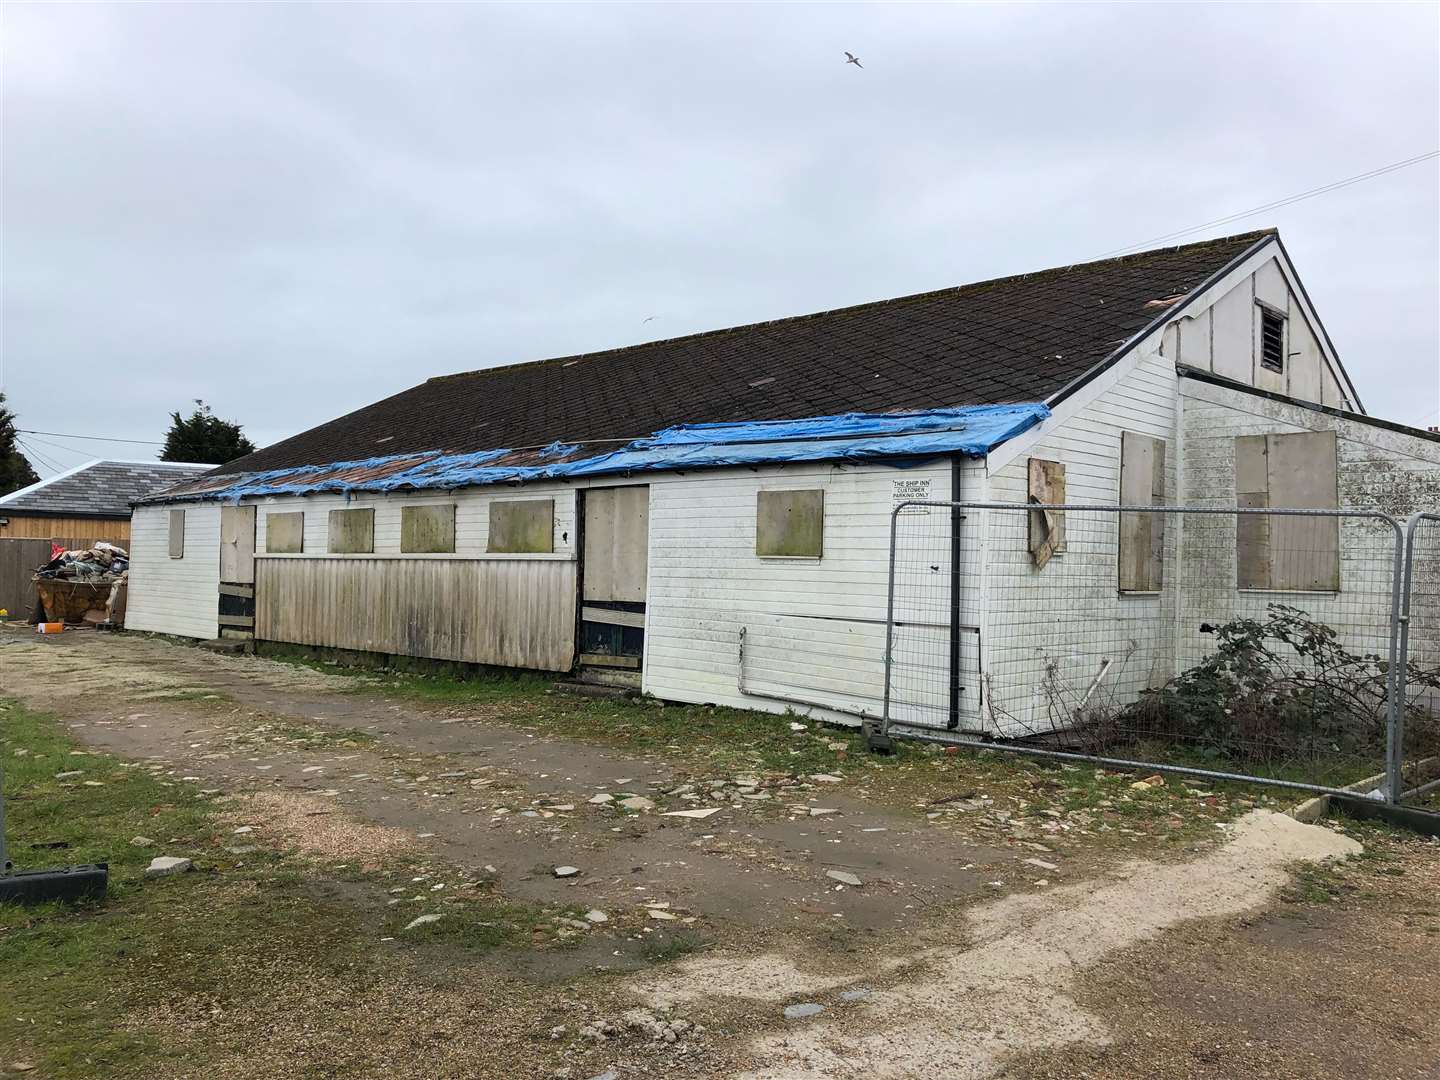 If plans are approved the derelict community hall will be turned into four holiday lets